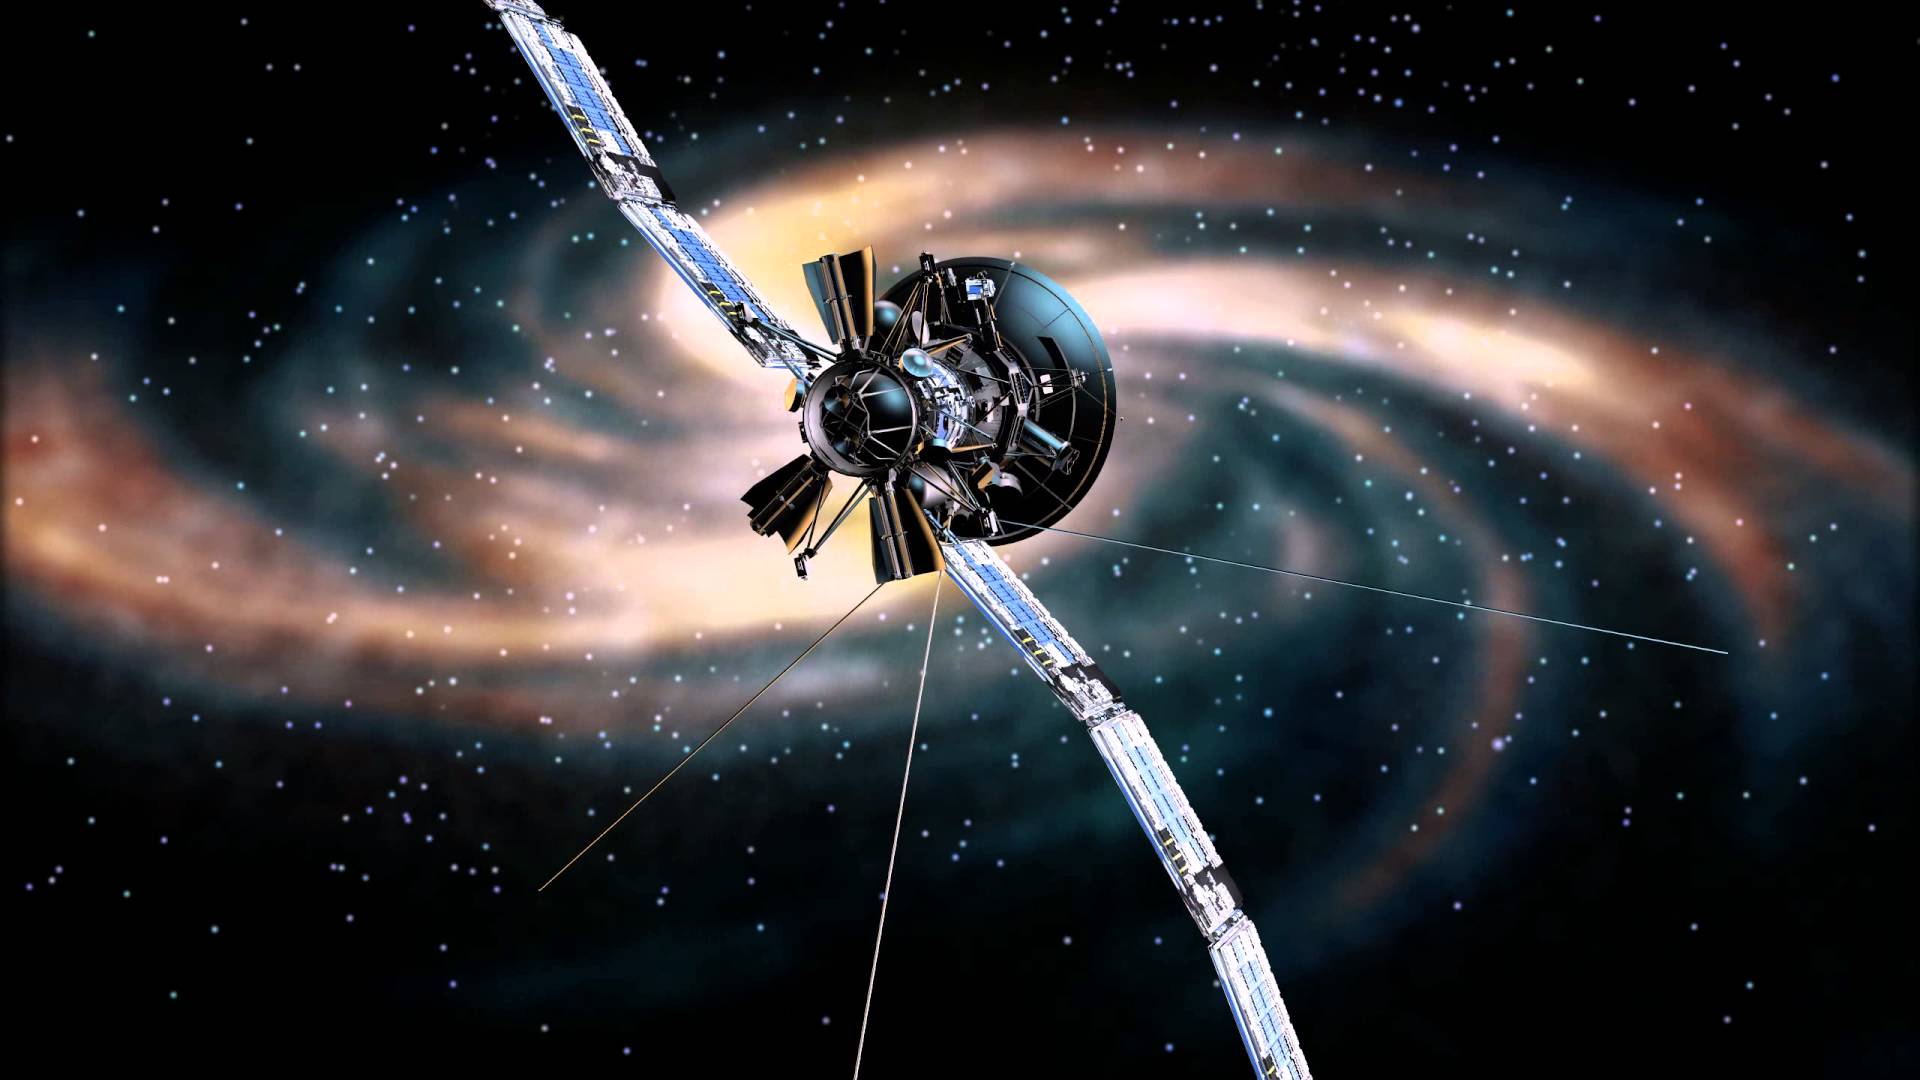 Wallpaper of Space Probe Pictures